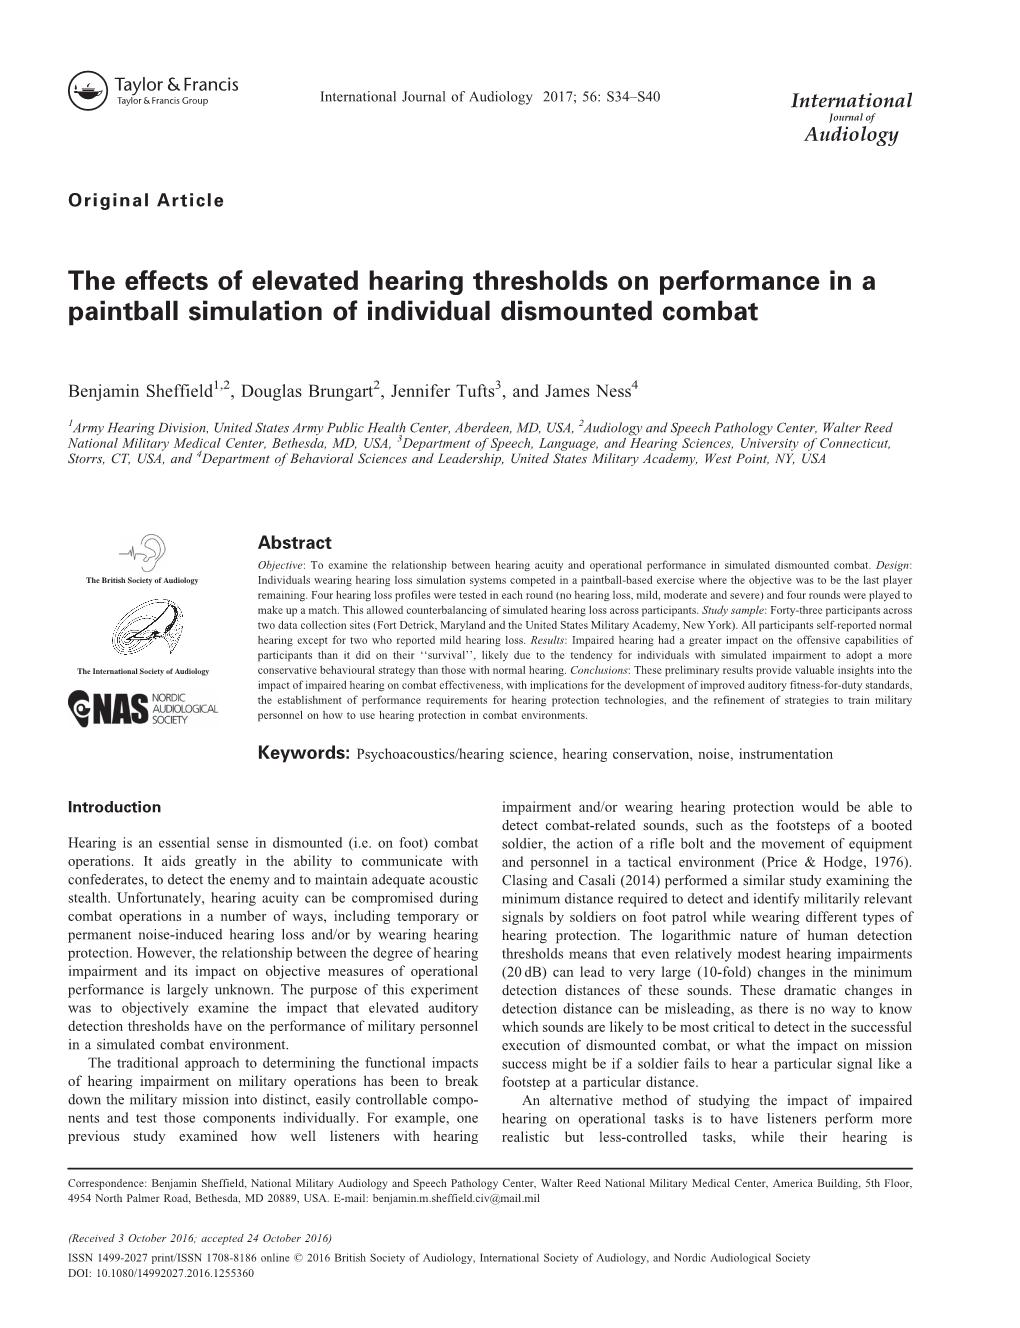 The Effects of Elevated Hearing Thresholds on Performance in a Paintball Simulation of Individual Dismounted Combat